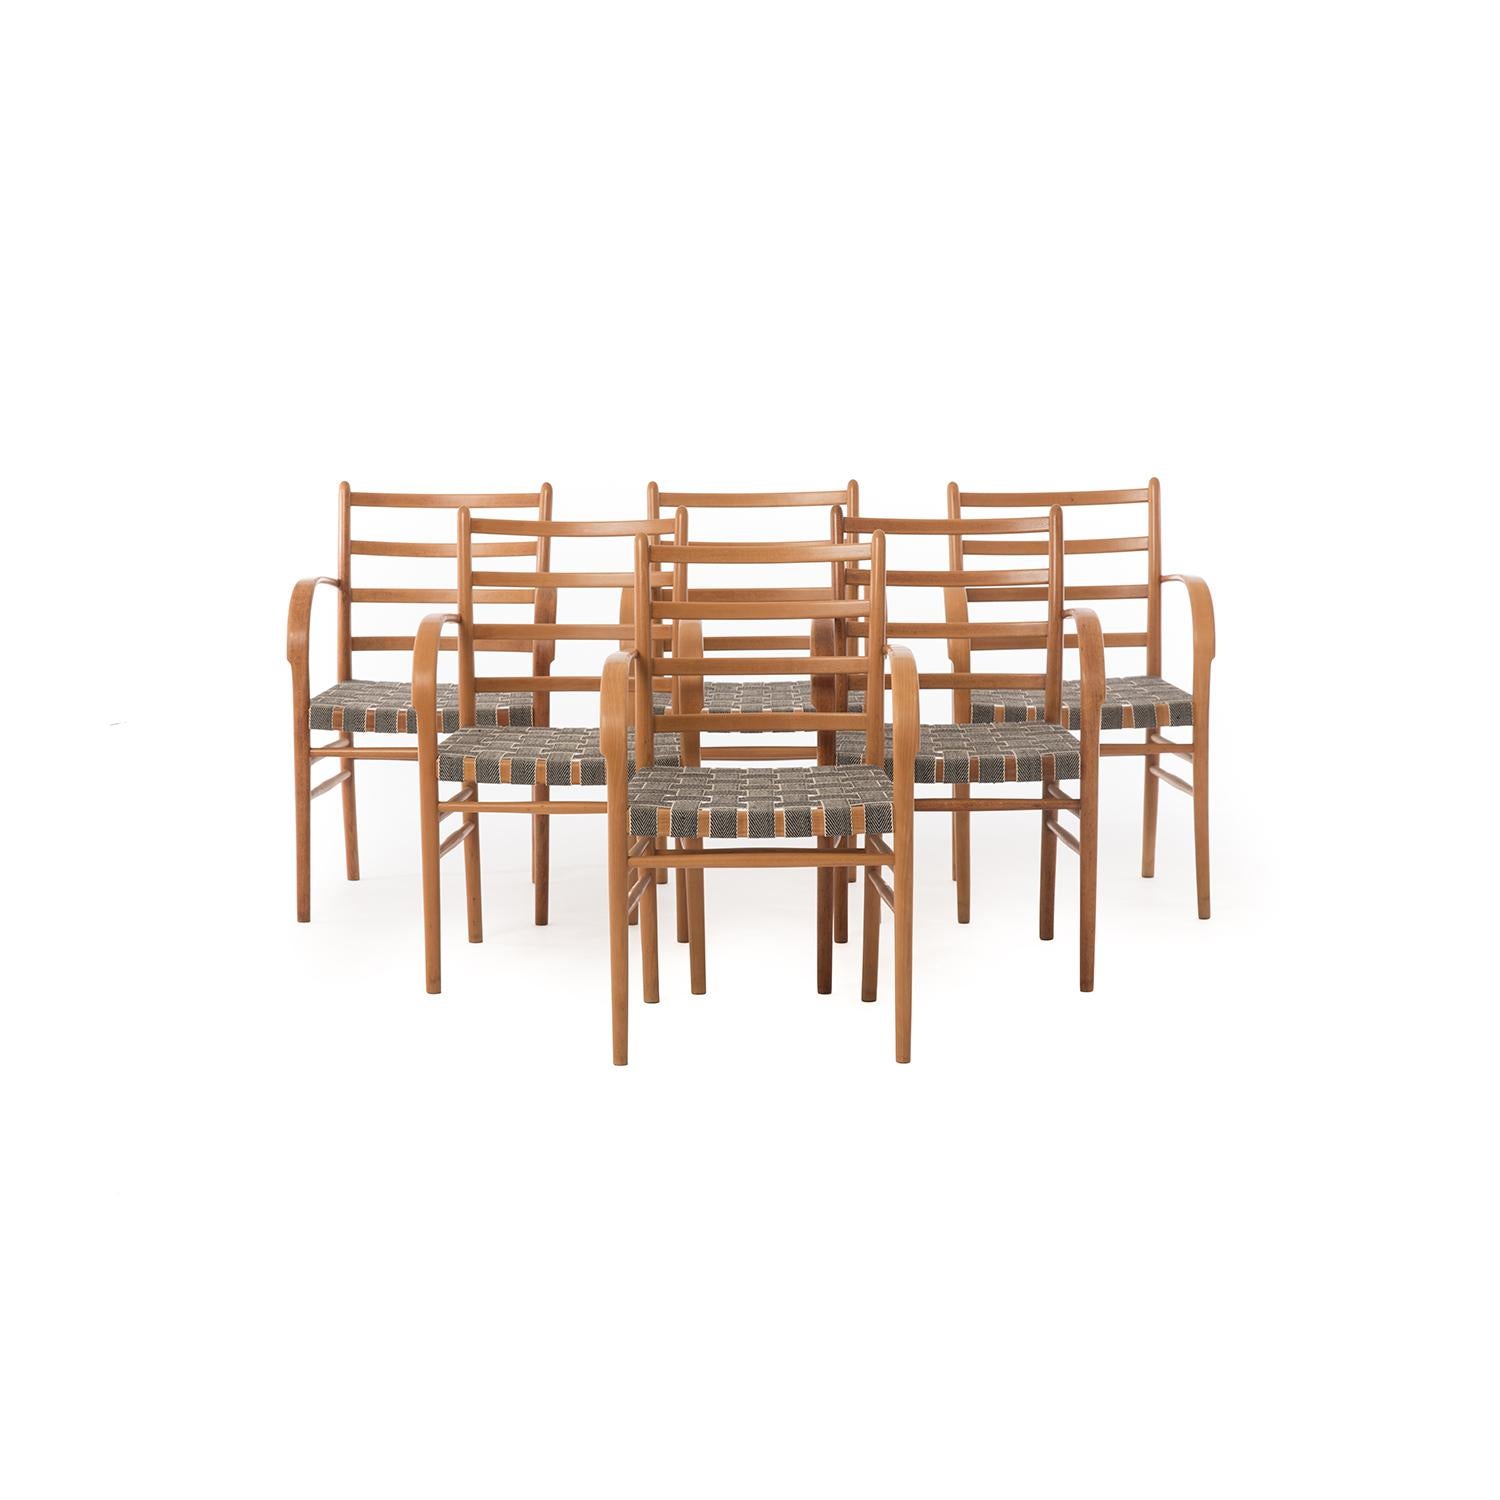 Built of European beechwood; these rare Viggo Sten Møller Scandinavian modern dining chairs feature a woven graphic seat made out of a black and cream hemp webbing. These fully restored Danish modern dining room chairs are a stylish choice for